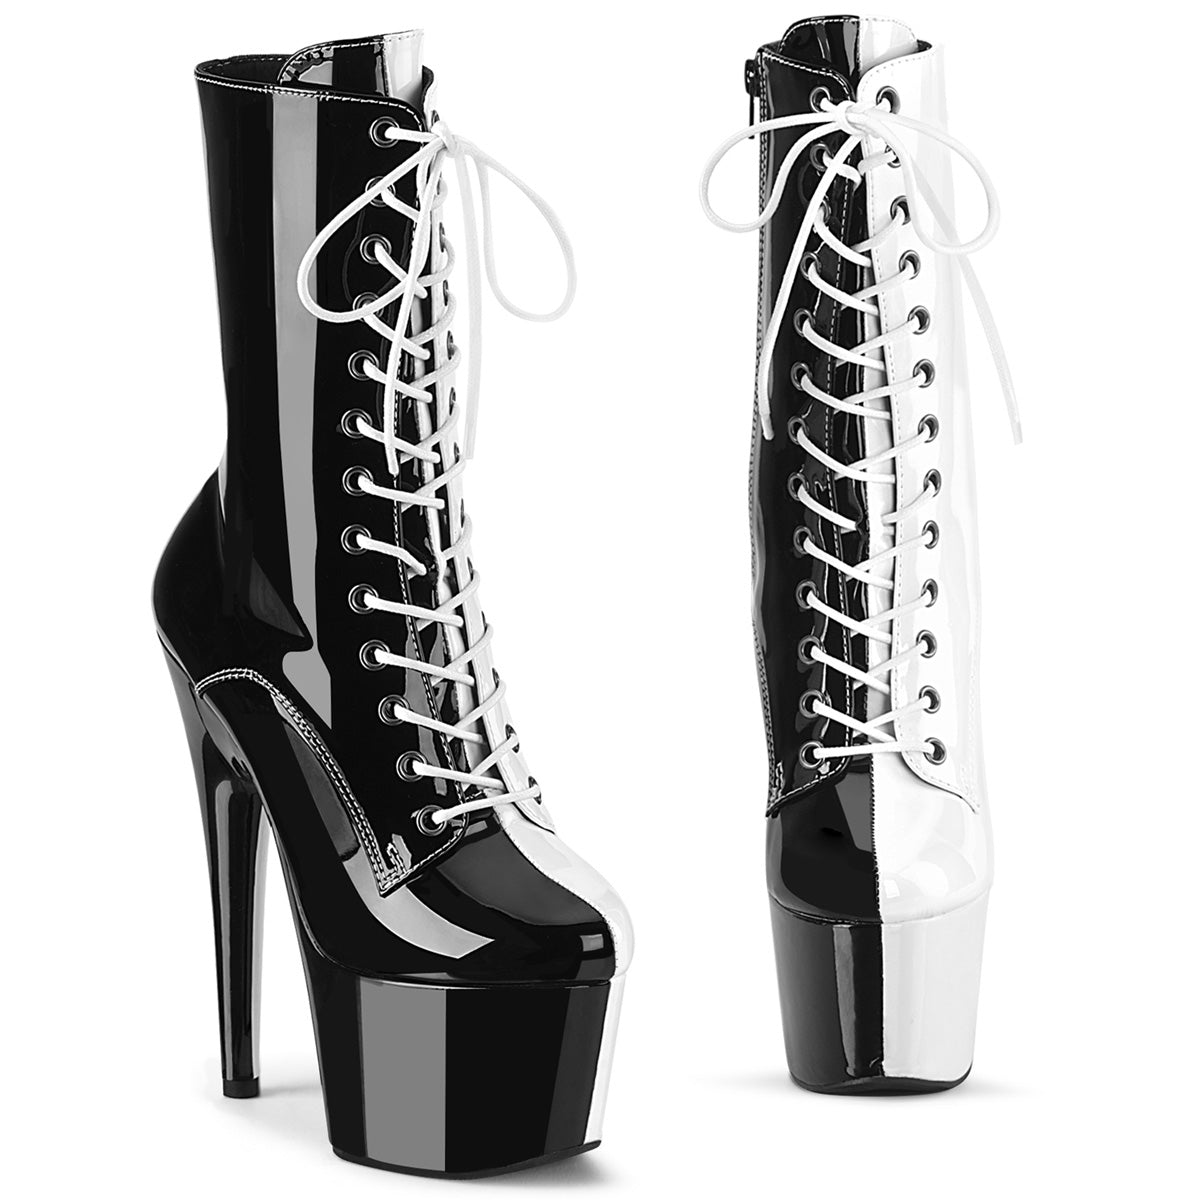 Pleaser ADORE 1040TT Platform Boots,Front Lace Boots - From Pleaser Sold By Alternative Footwear